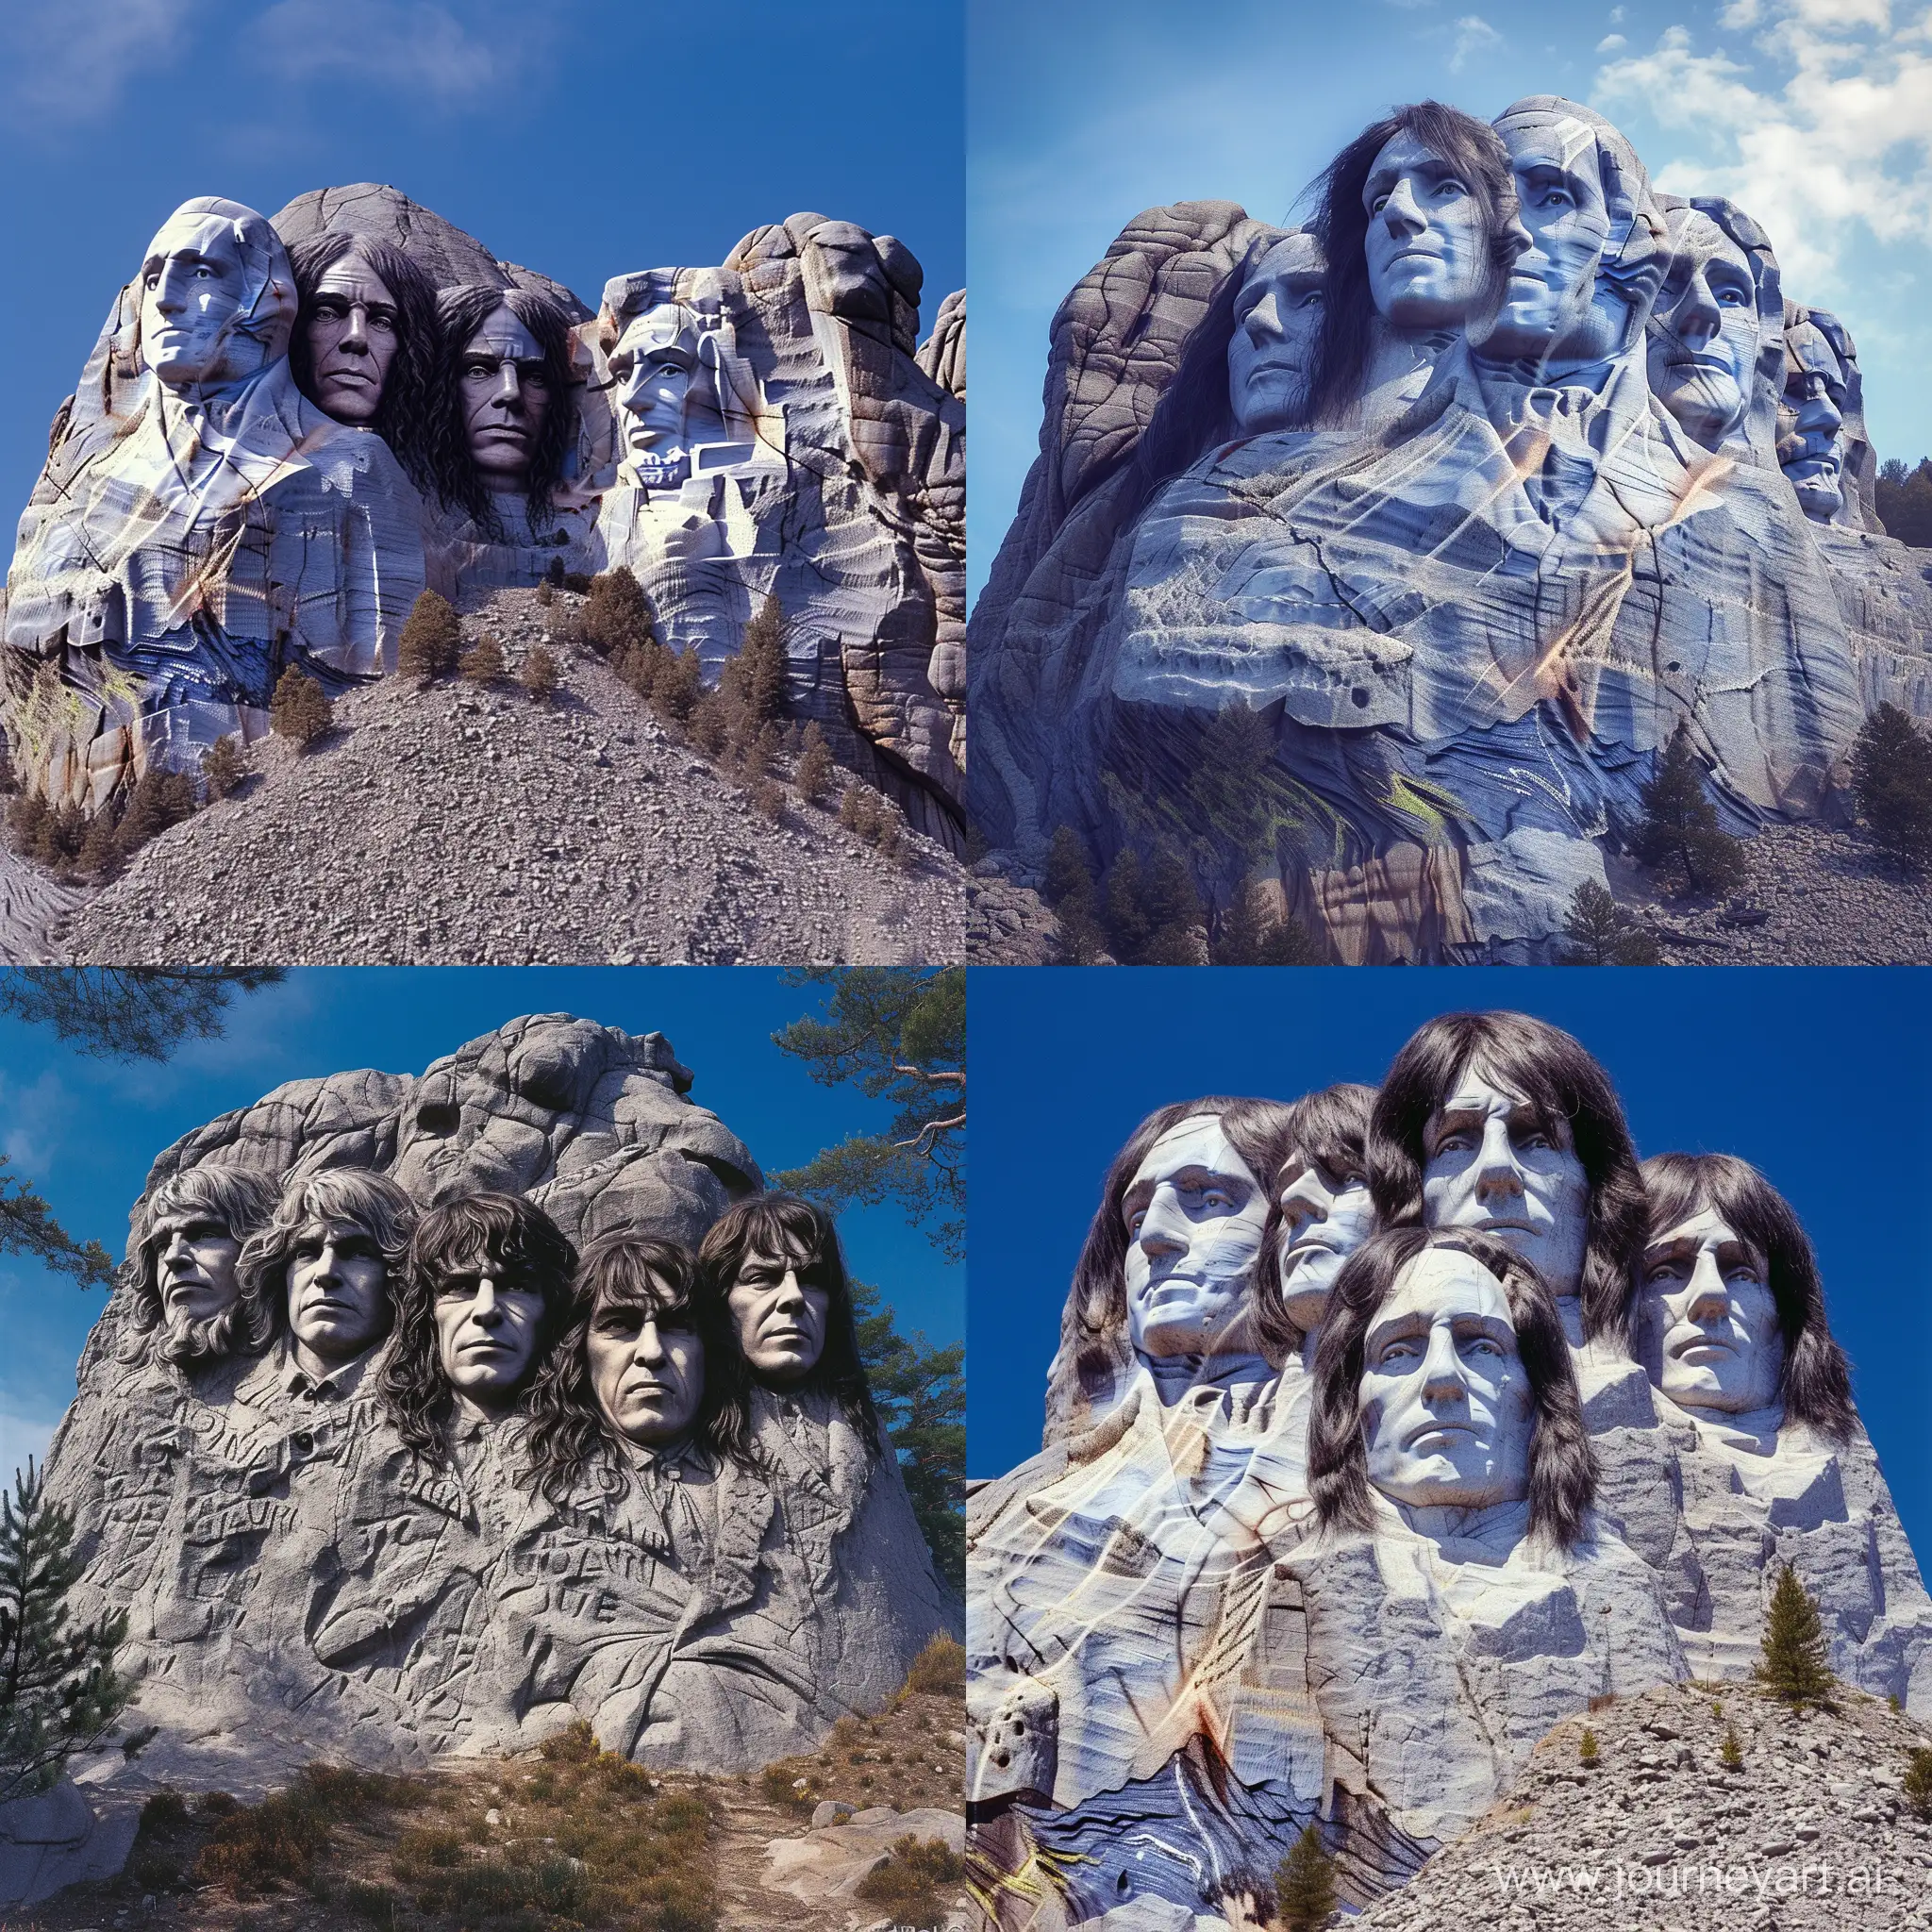 Classic-Rock-Icons-Carved-in-Granite-Youthful-Portraits-of-Deep-Purple-Members-on-Mount-Rushmore-Lookalike